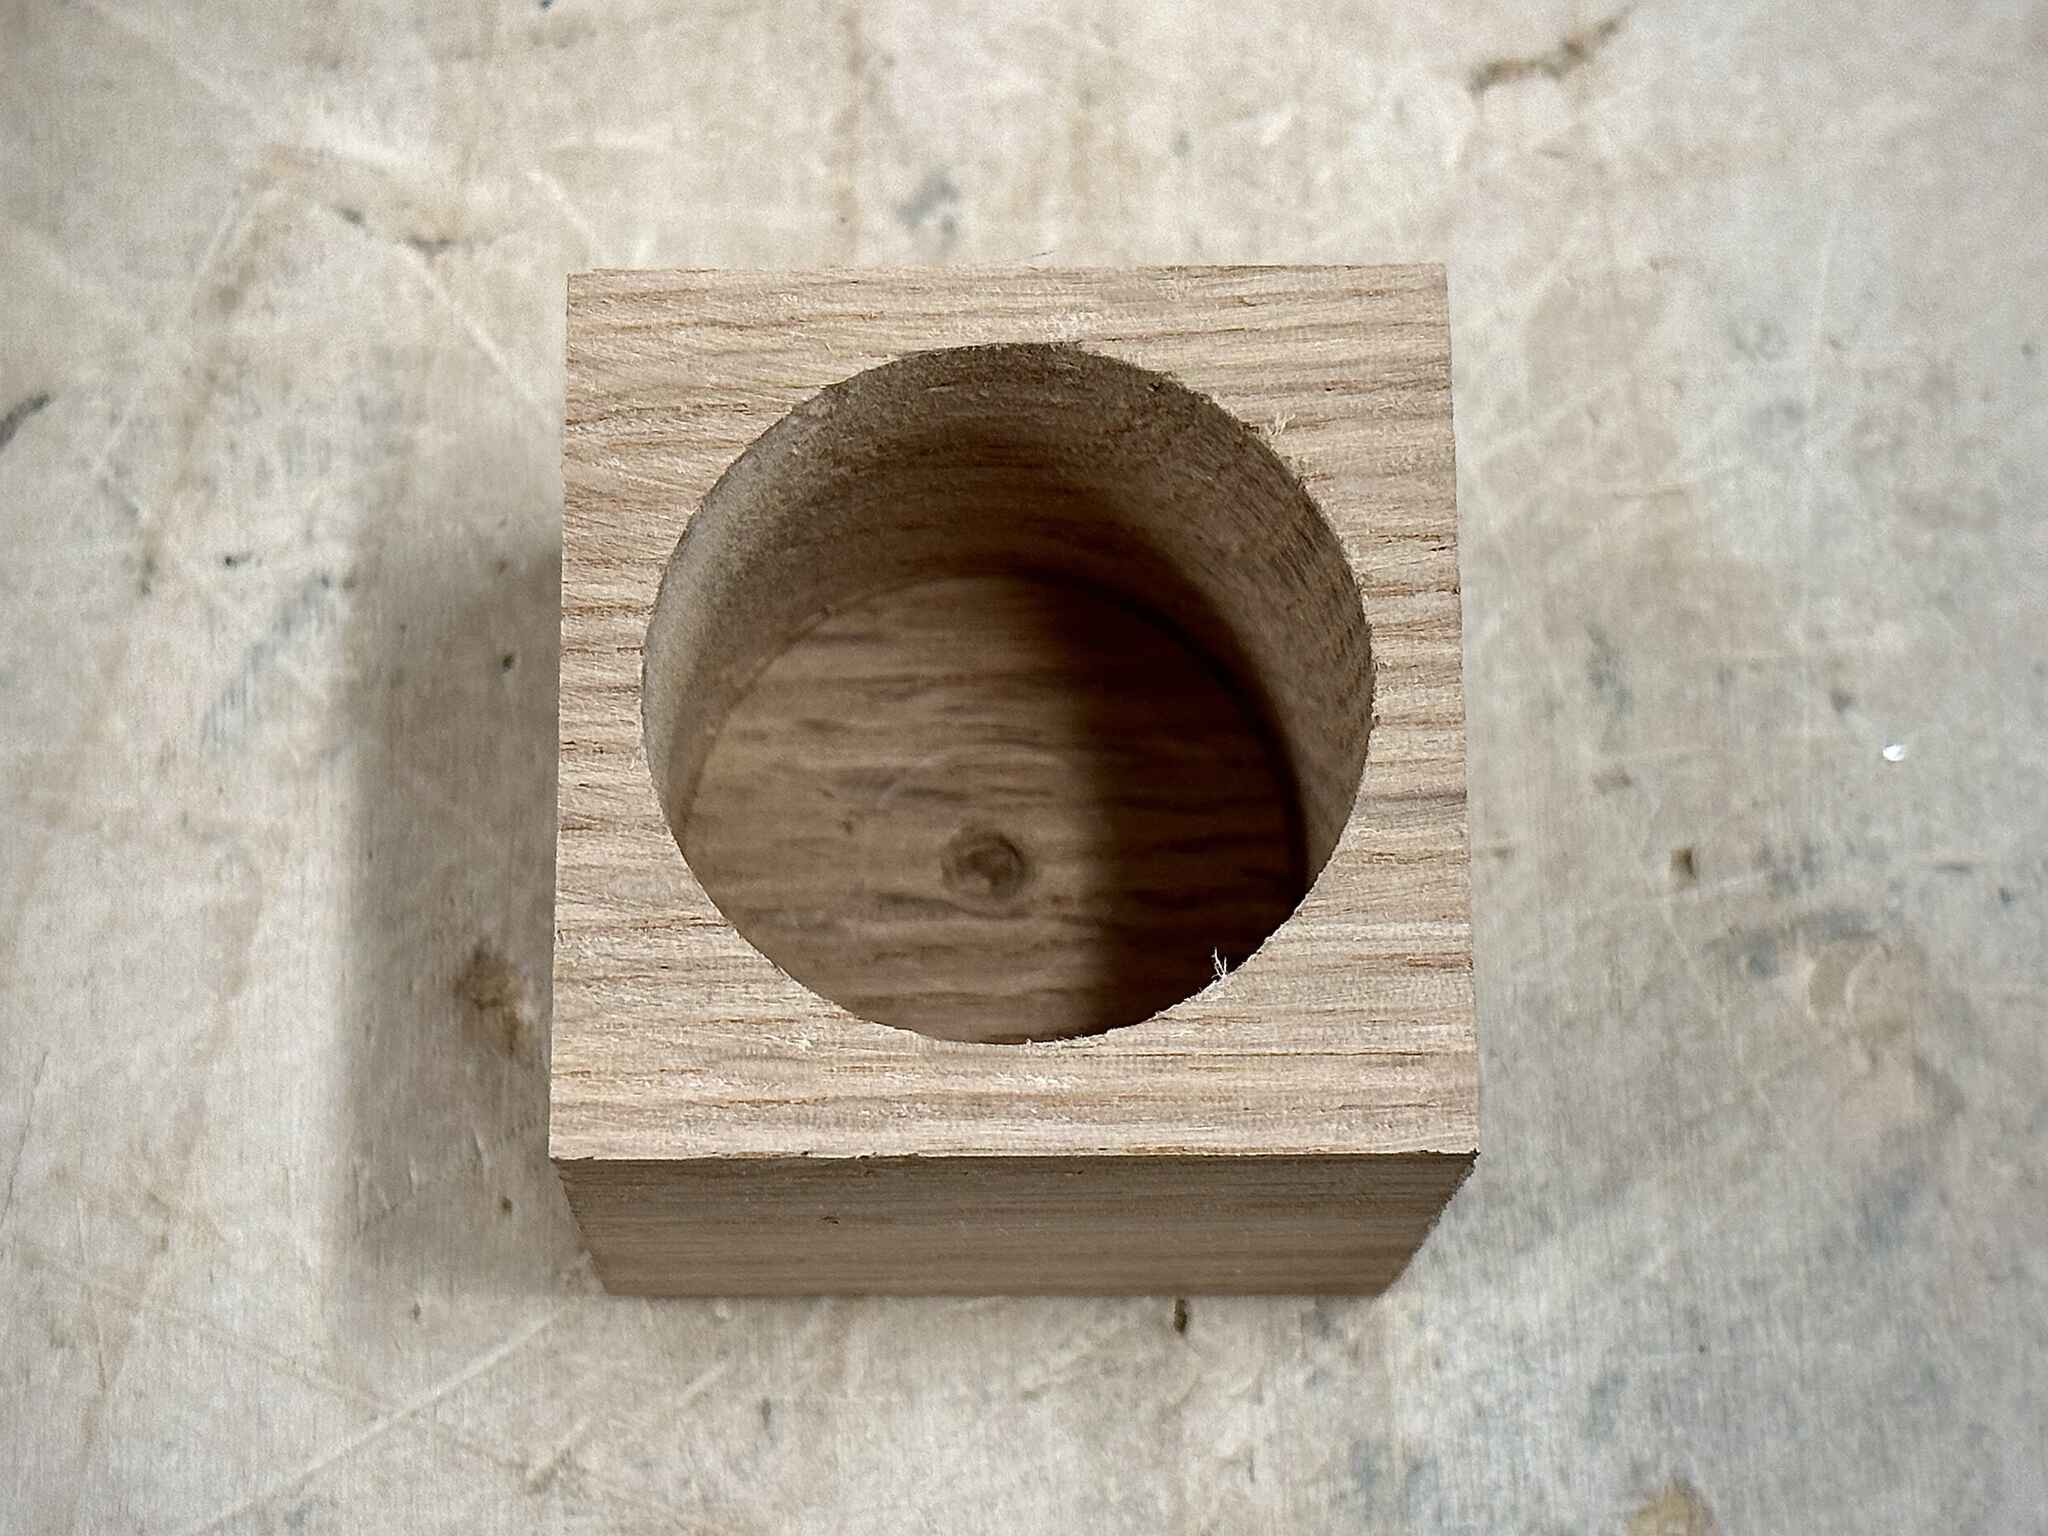 a slightly shorter cubic wood piece, with a big cylindrical hole at its center and top section already cut off